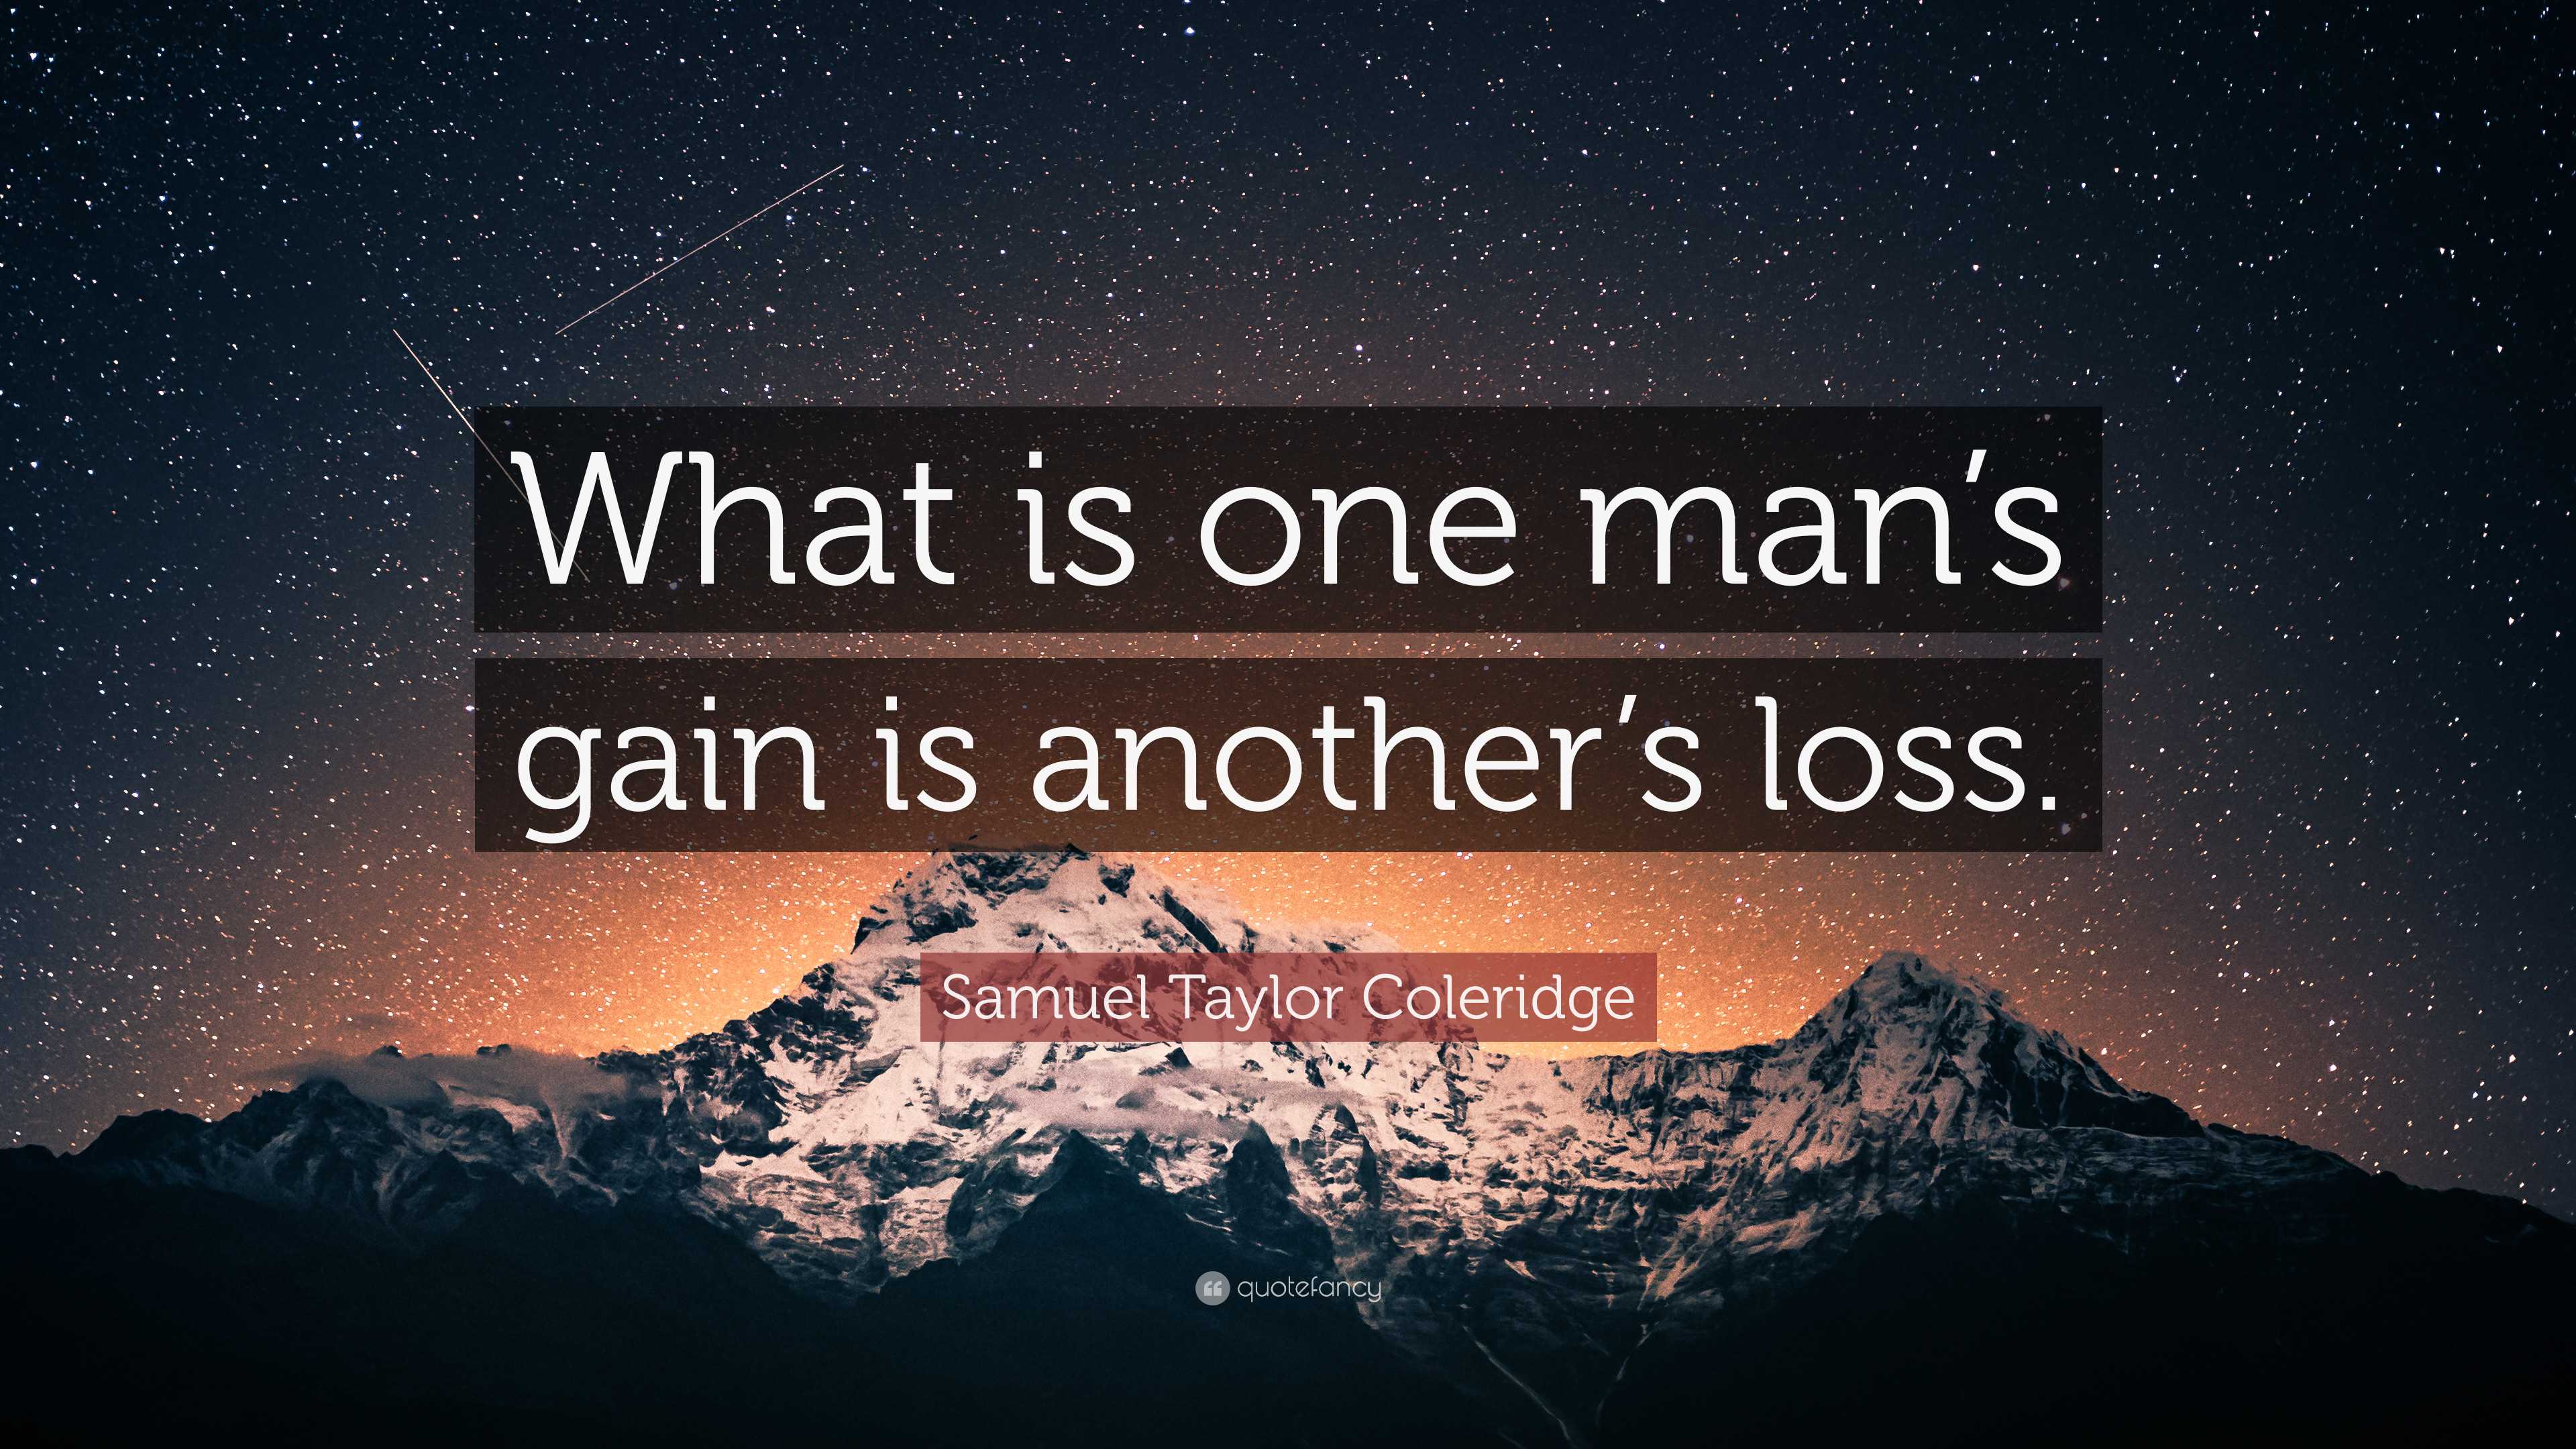 Samuel Taylor Coleridge Quote: “What is one man's gain is another's loss.”